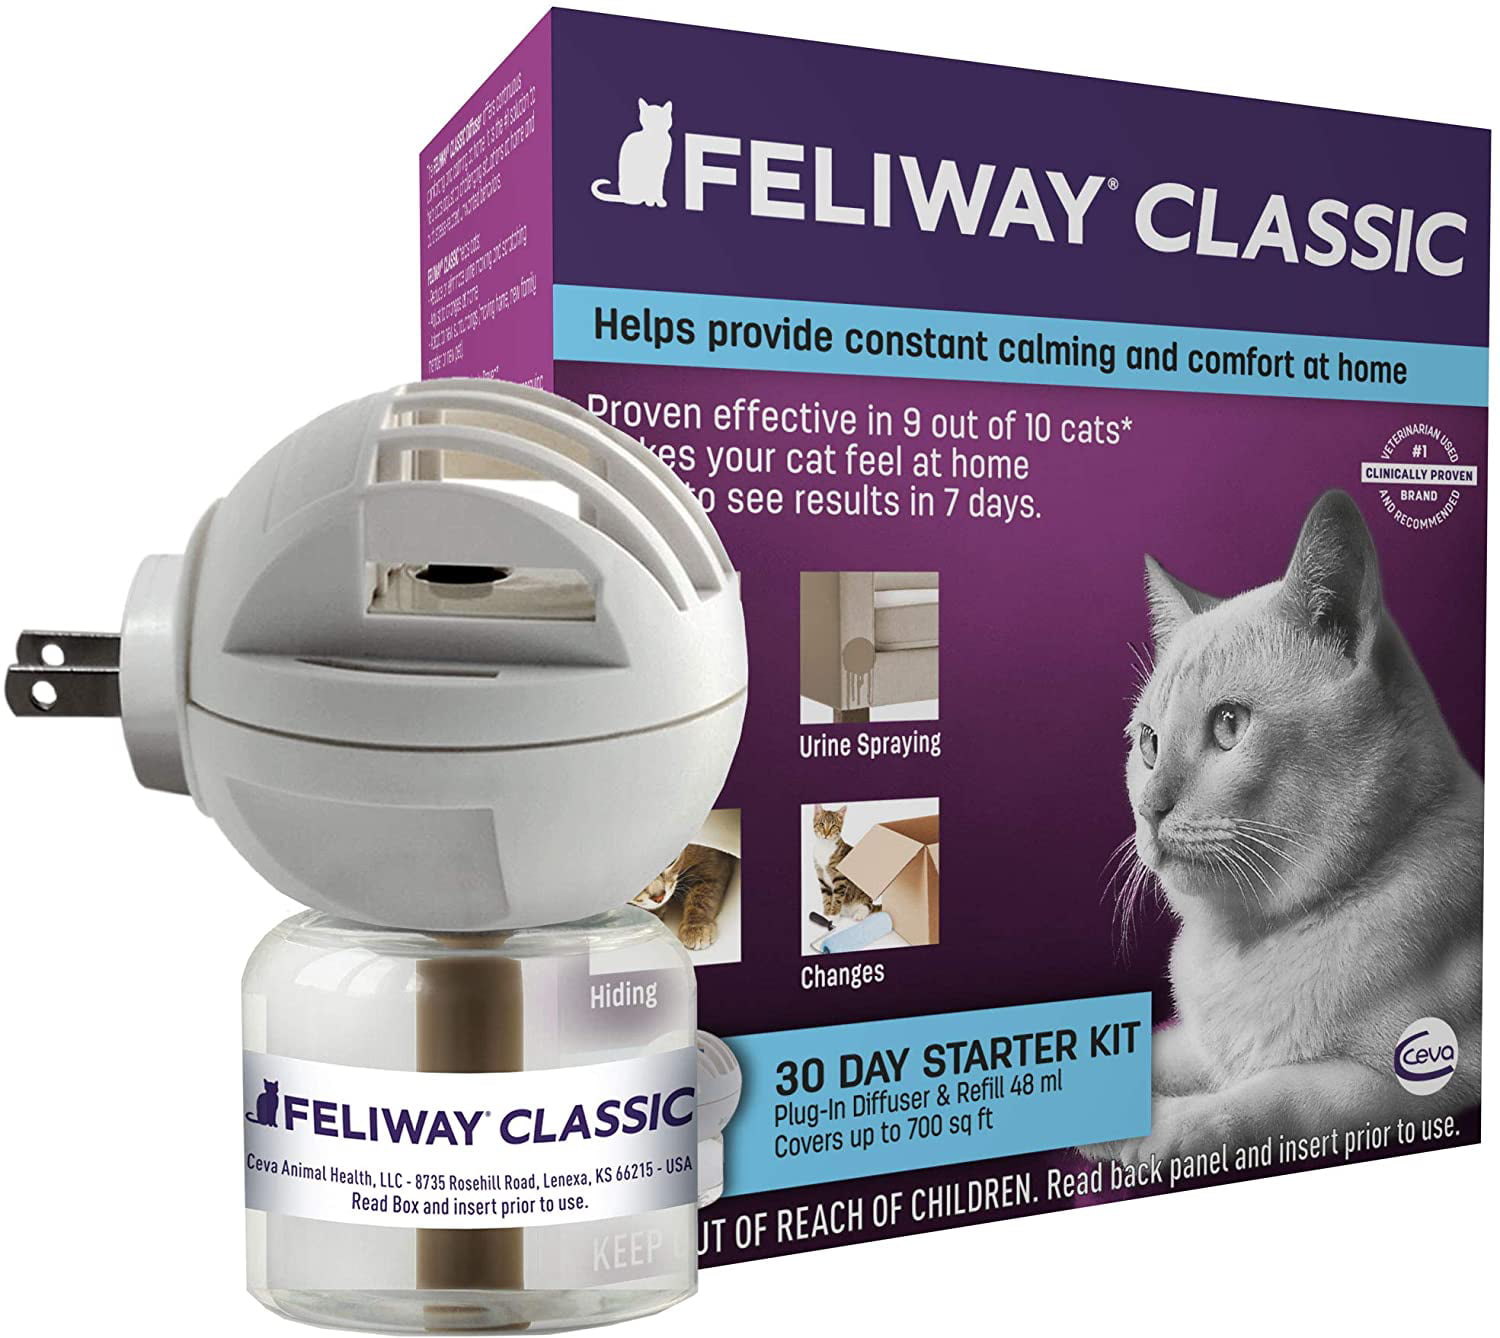 Feliway Classic Cat Calming Diffuser Kit for Cats (30 Day Starter Kit